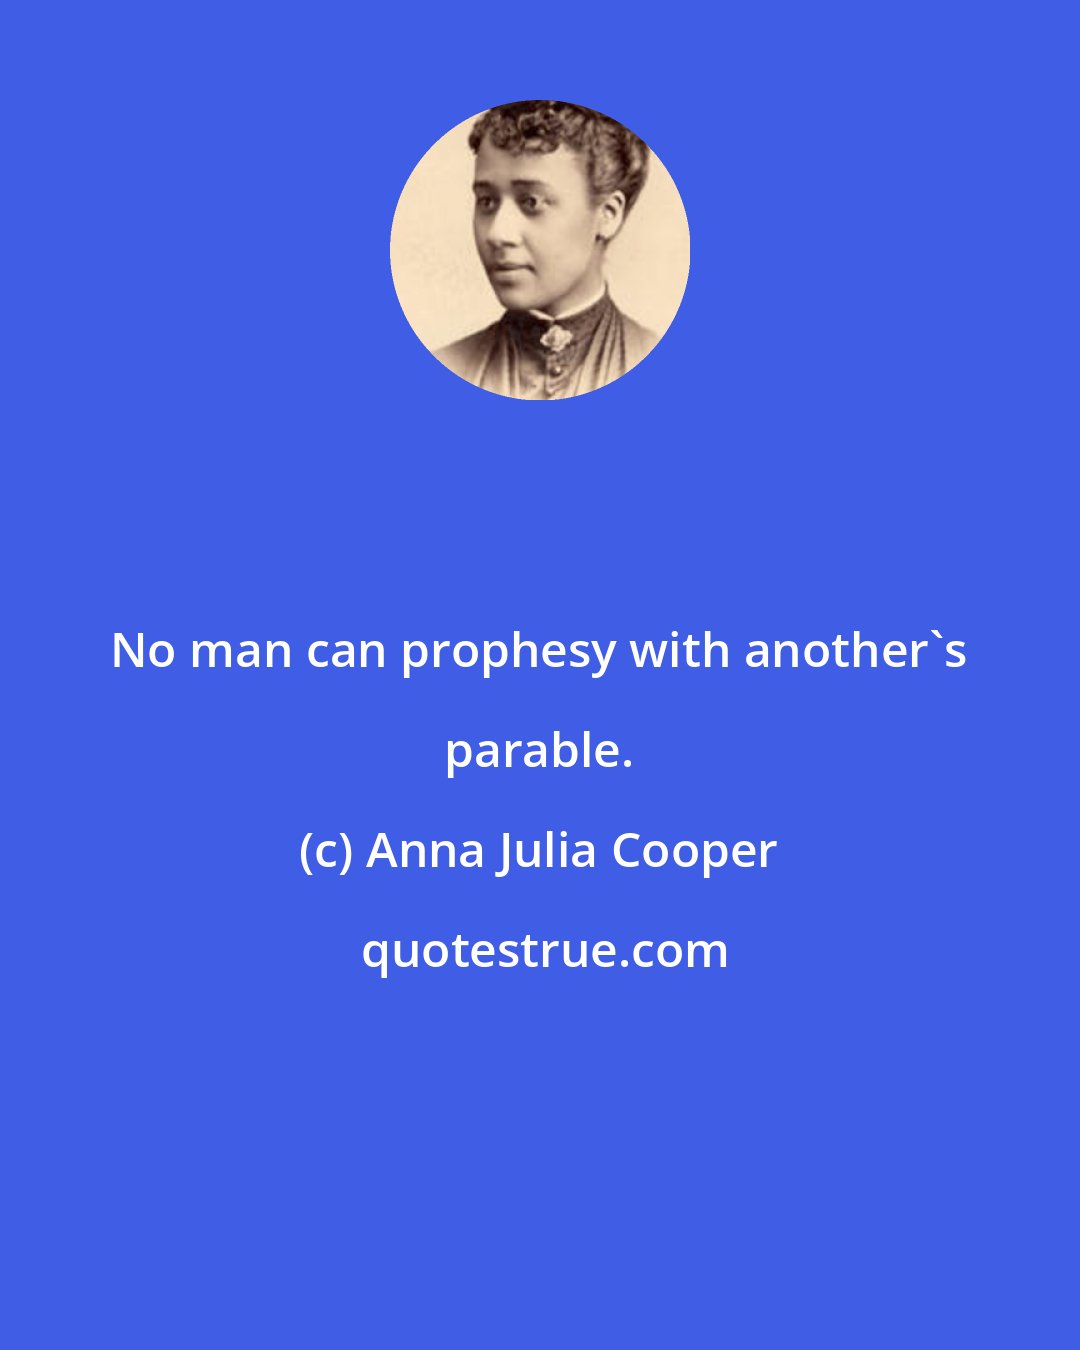 Anna Julia Cooper: No man can prophesy with another's parable.